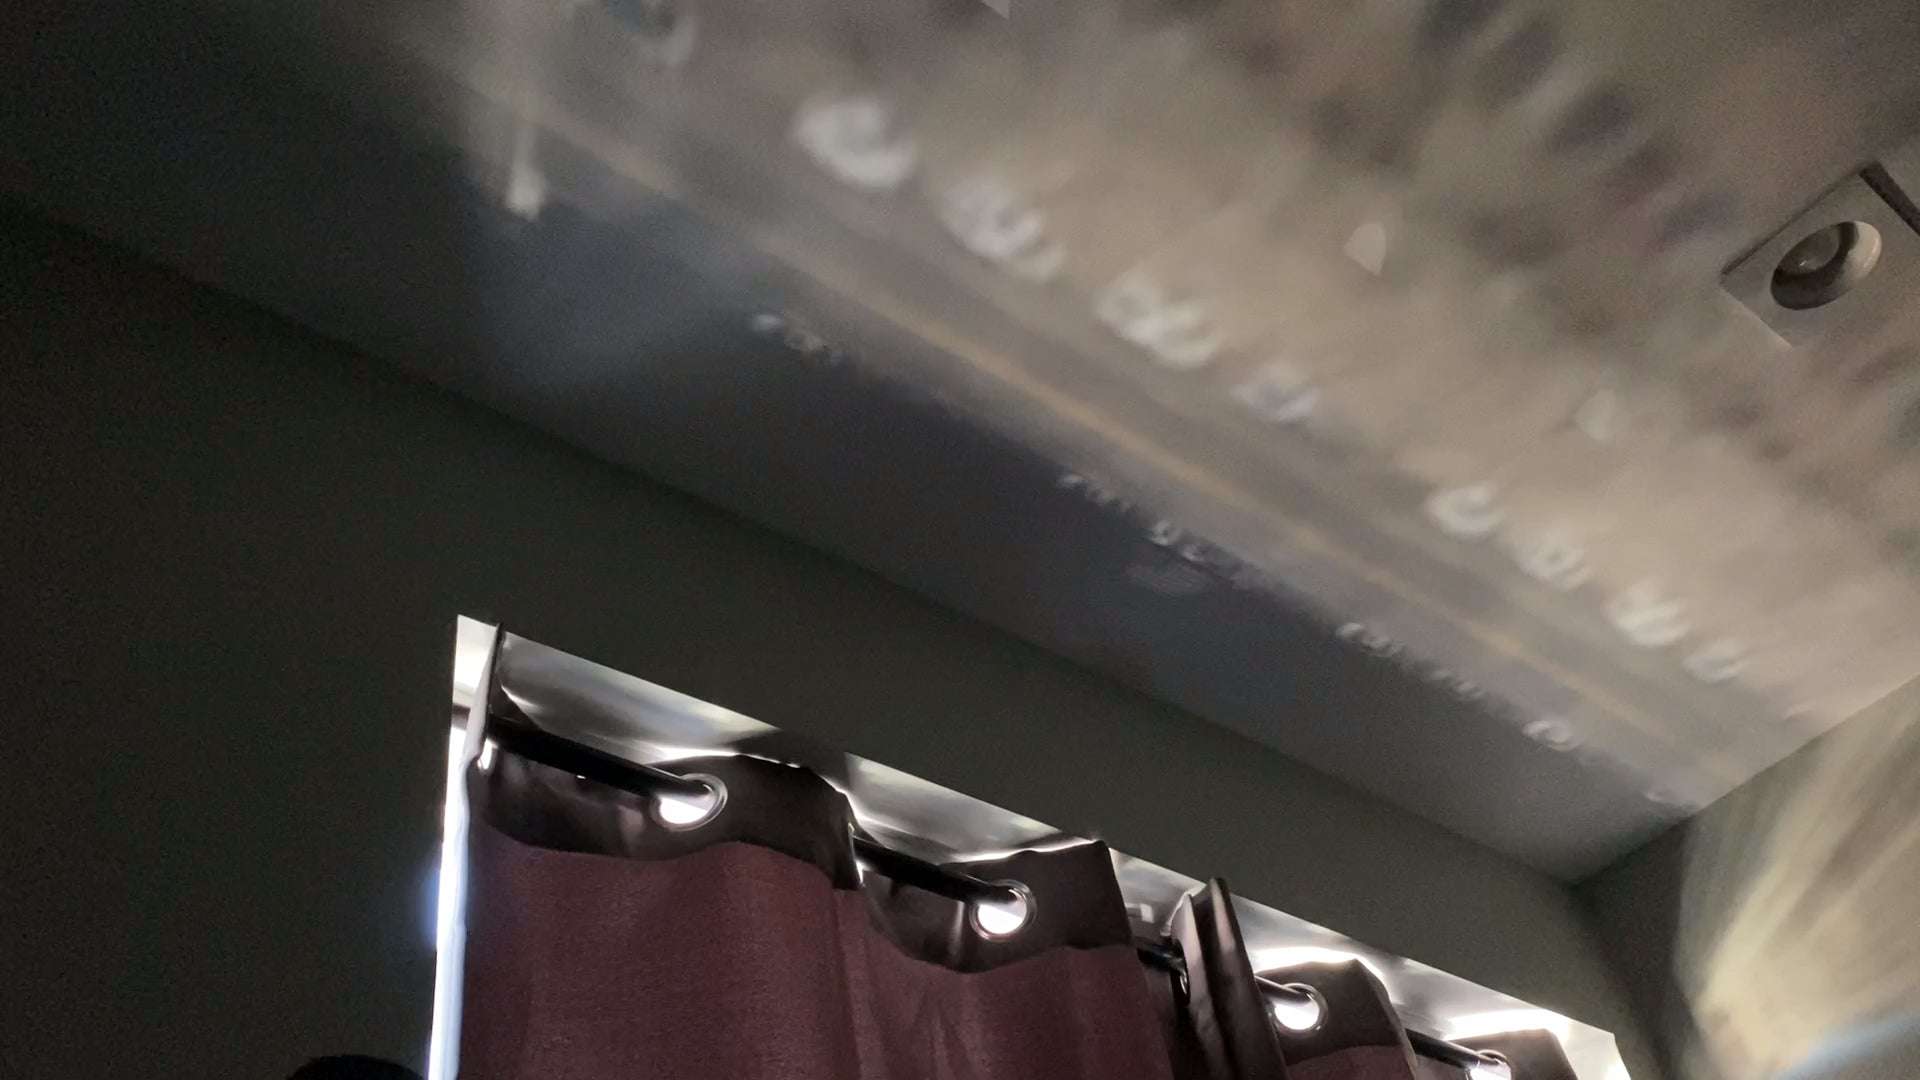 image for The curtains in my room create a "natural" pinhole camera that projects images of the street below onto my ceiling : woahdude